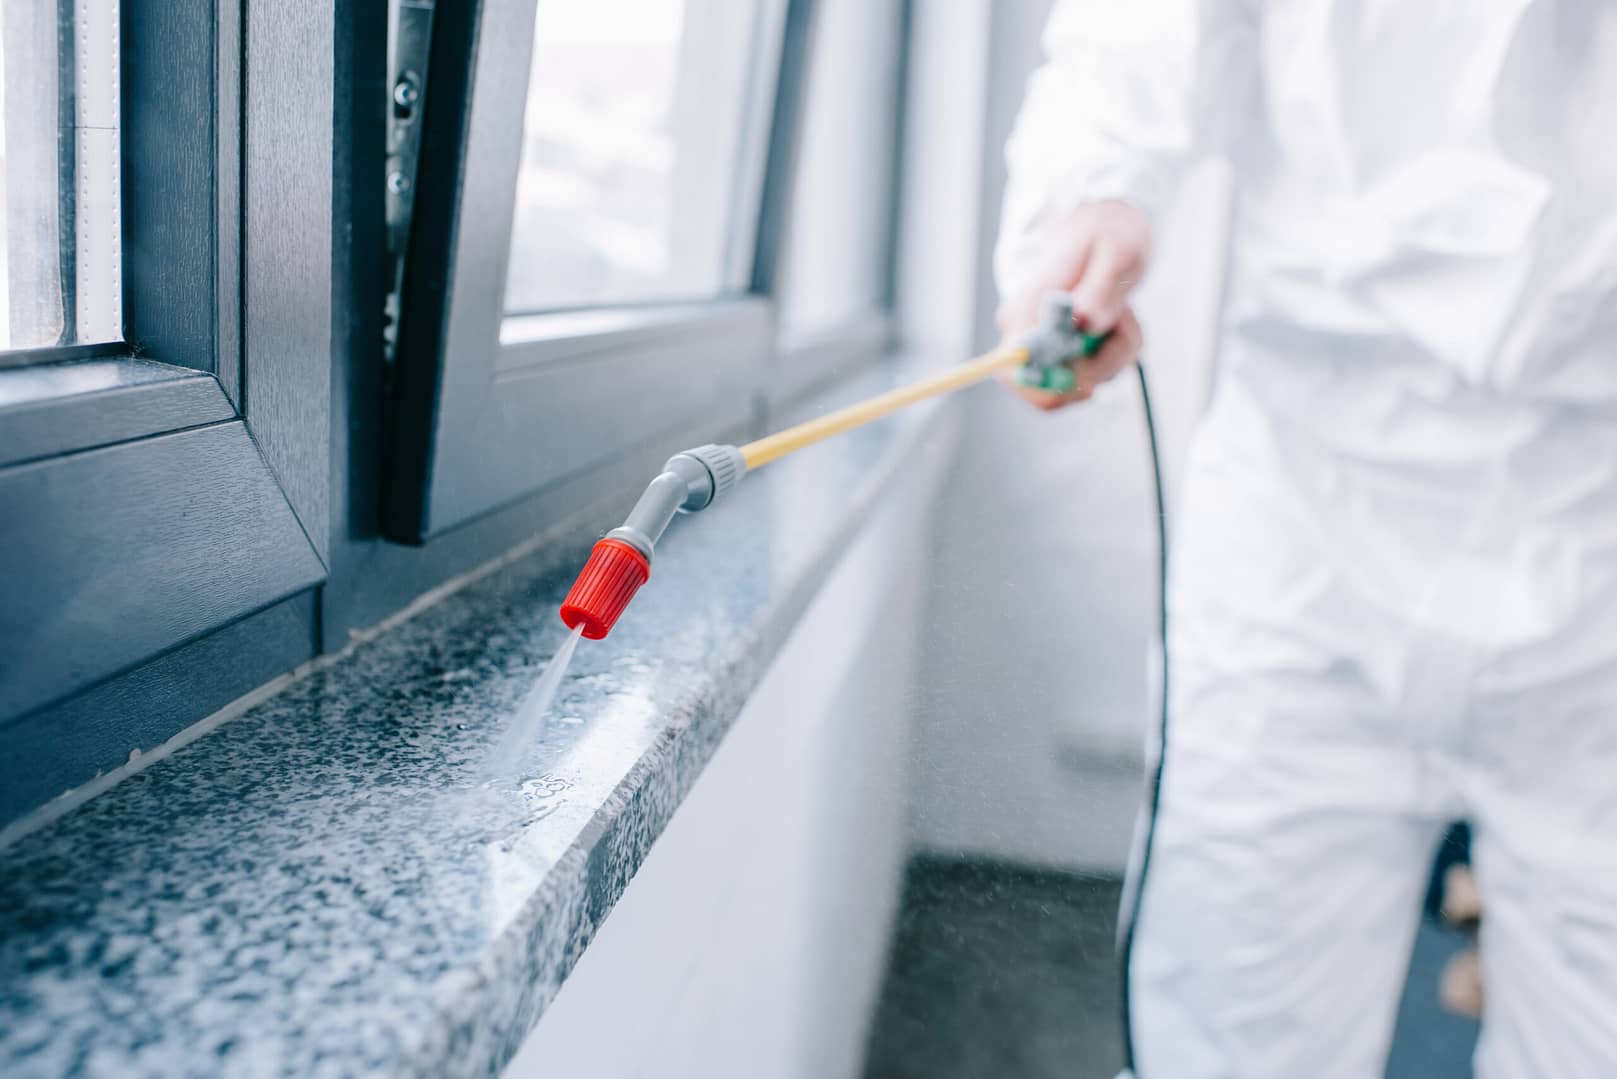 Pest control worker wearing protective gear spraying pesticides on a windowsill at a home to eliminate pests.